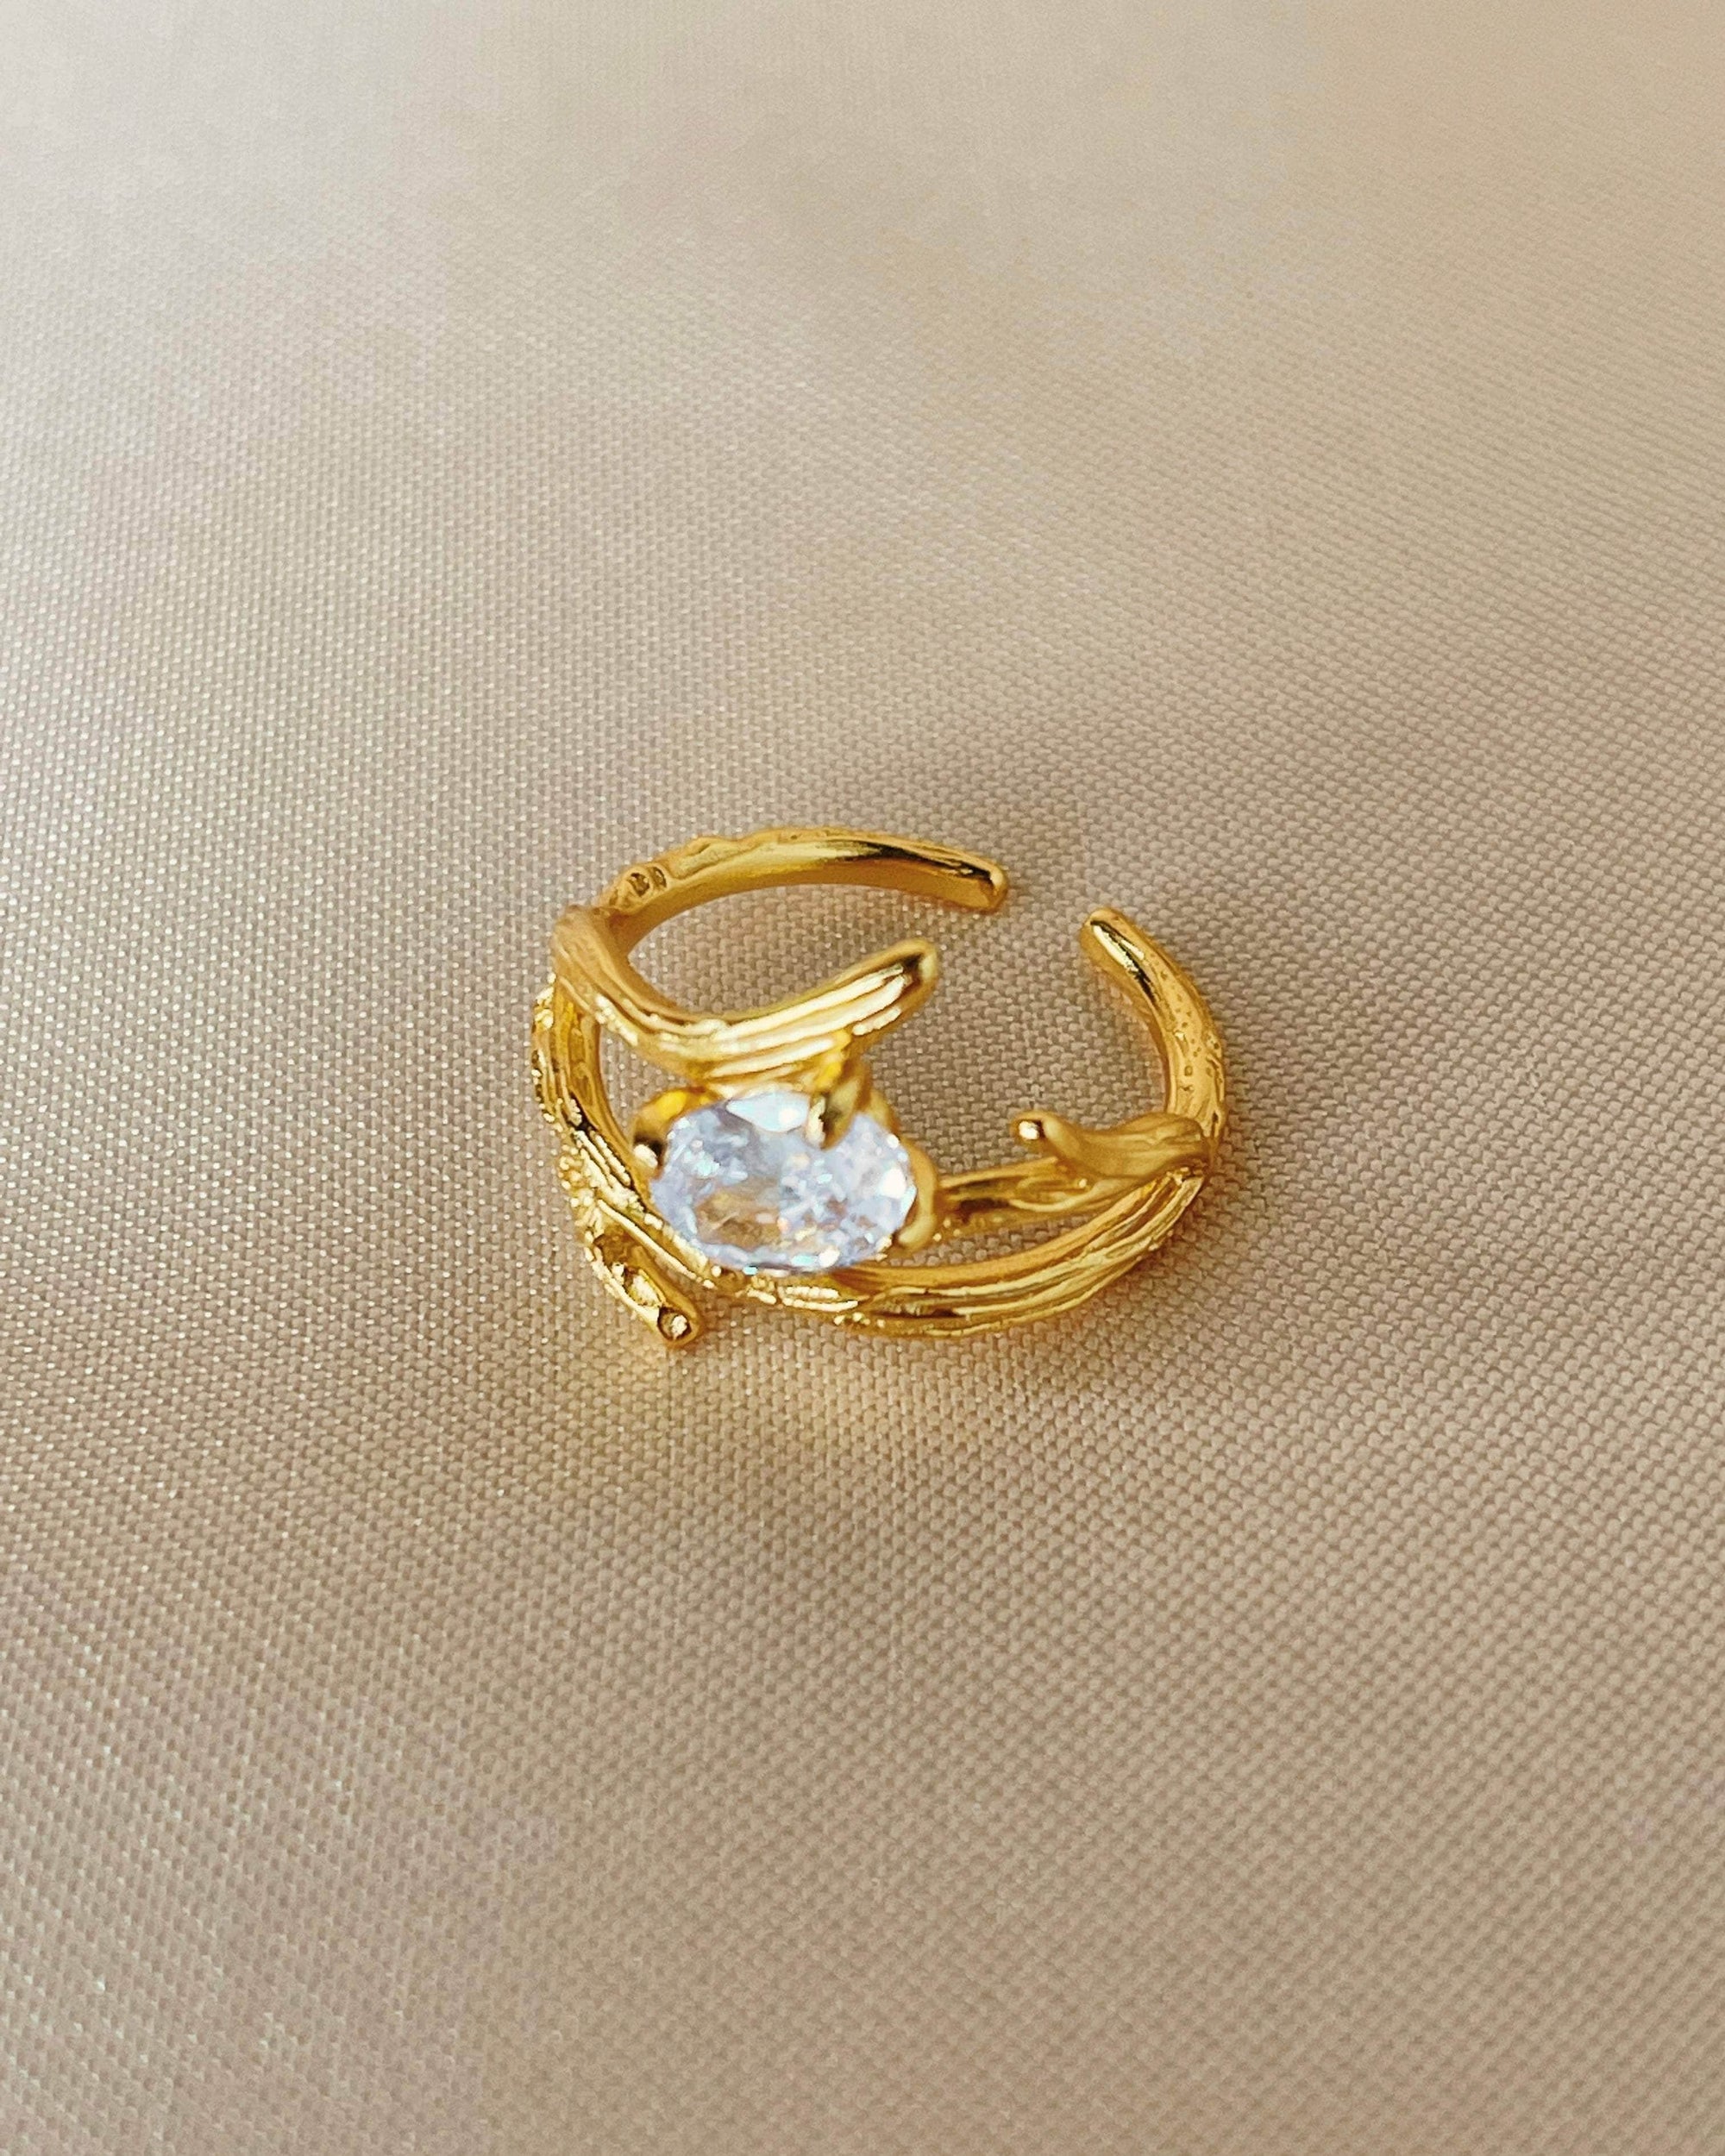 So Dainty Co. Rings Jaelynn Gold Ring Gold Plated 925 Sterling Silver Jewelry